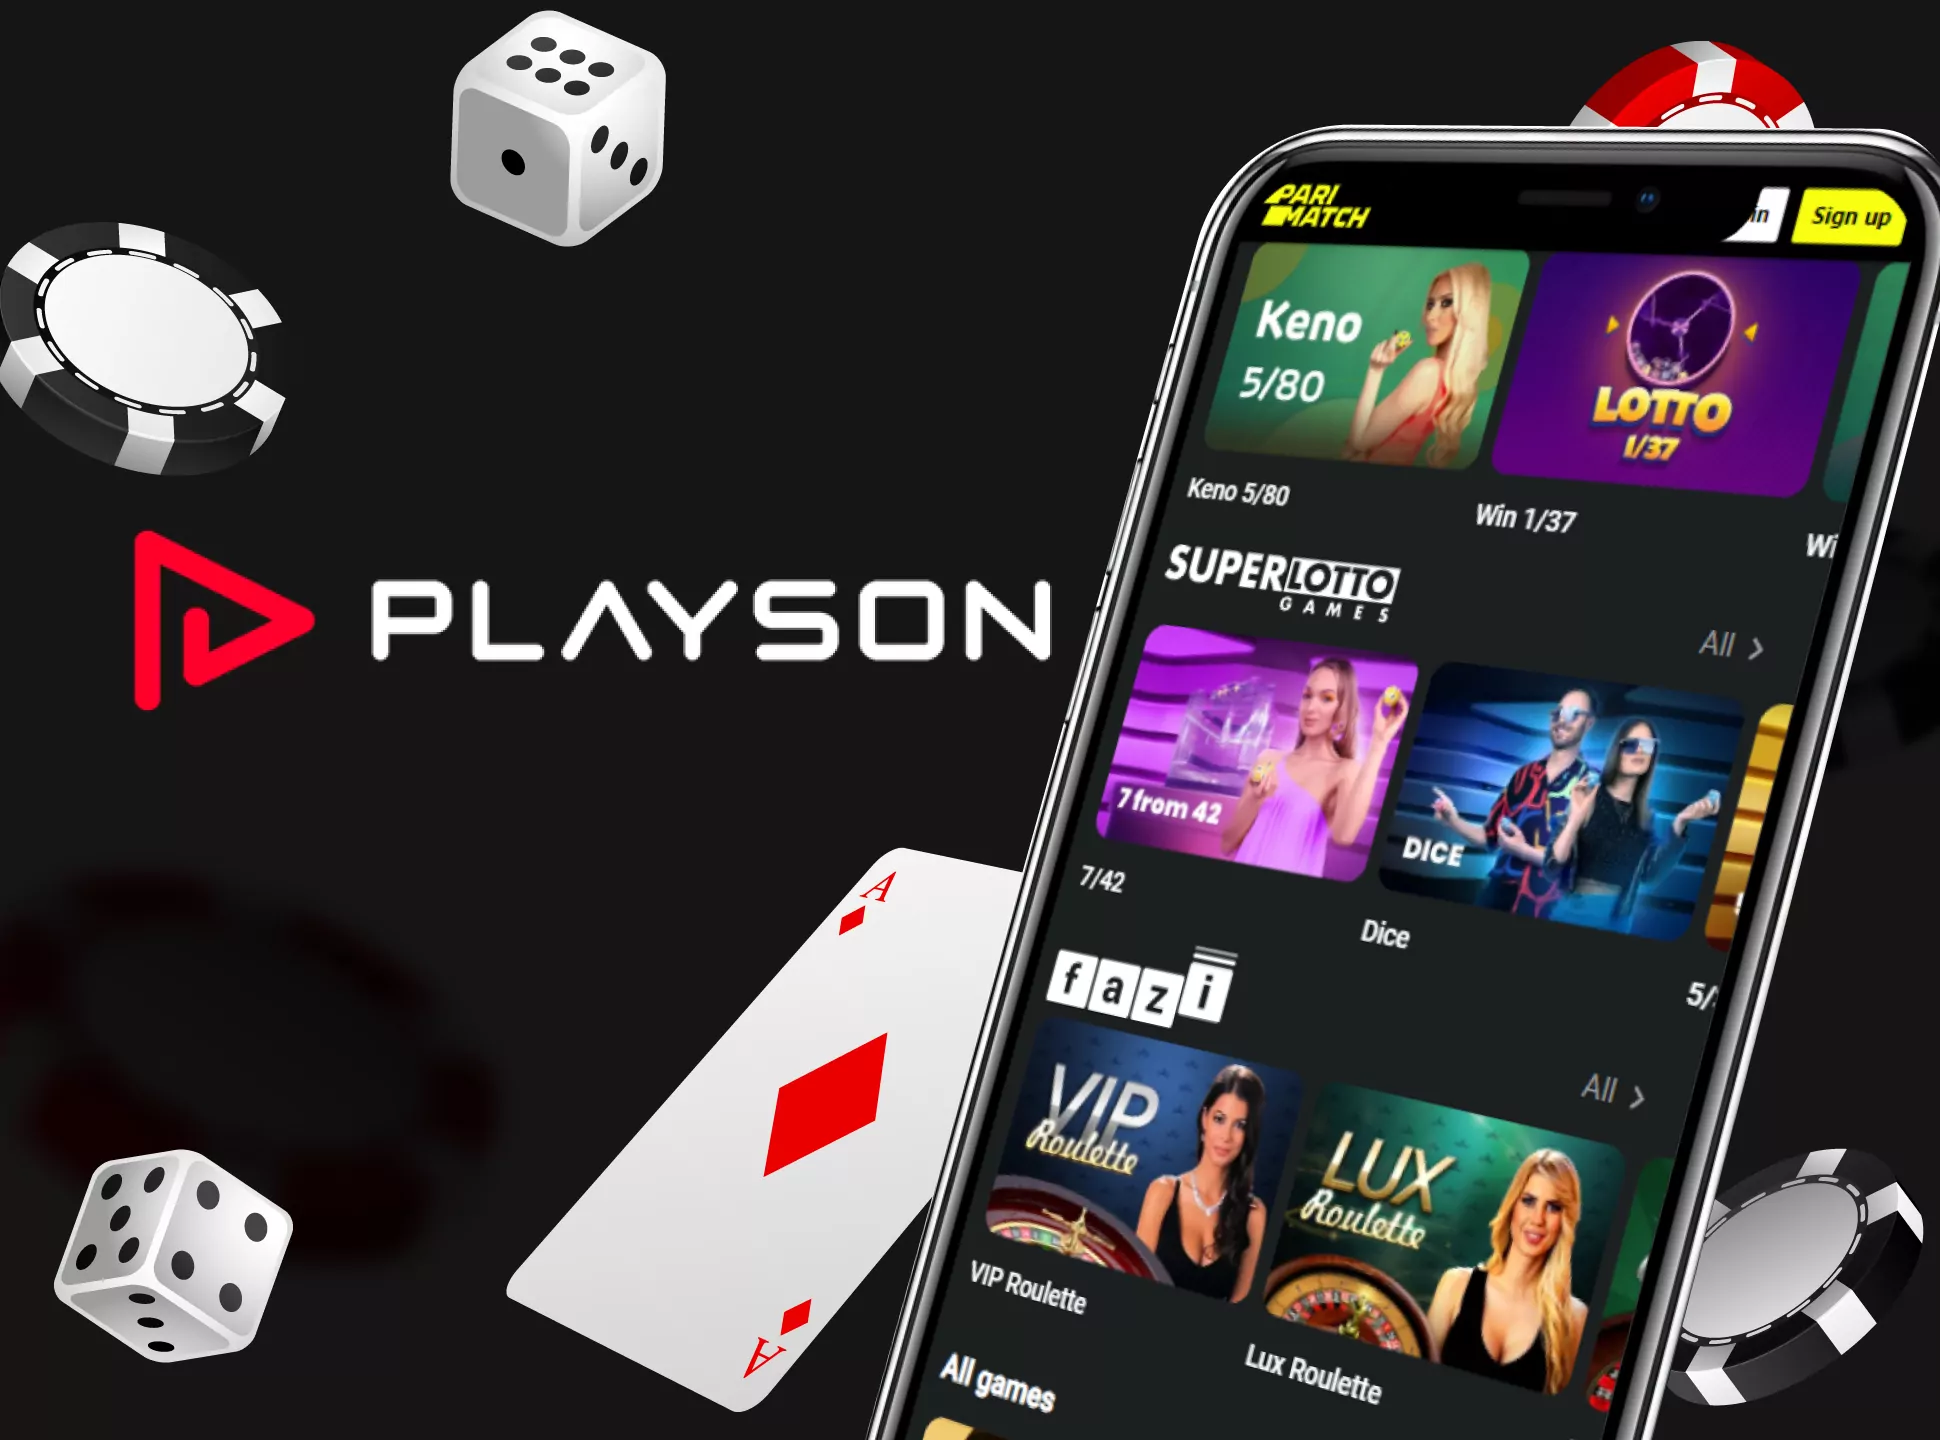 Playson provides many different casino games to Parimatch.